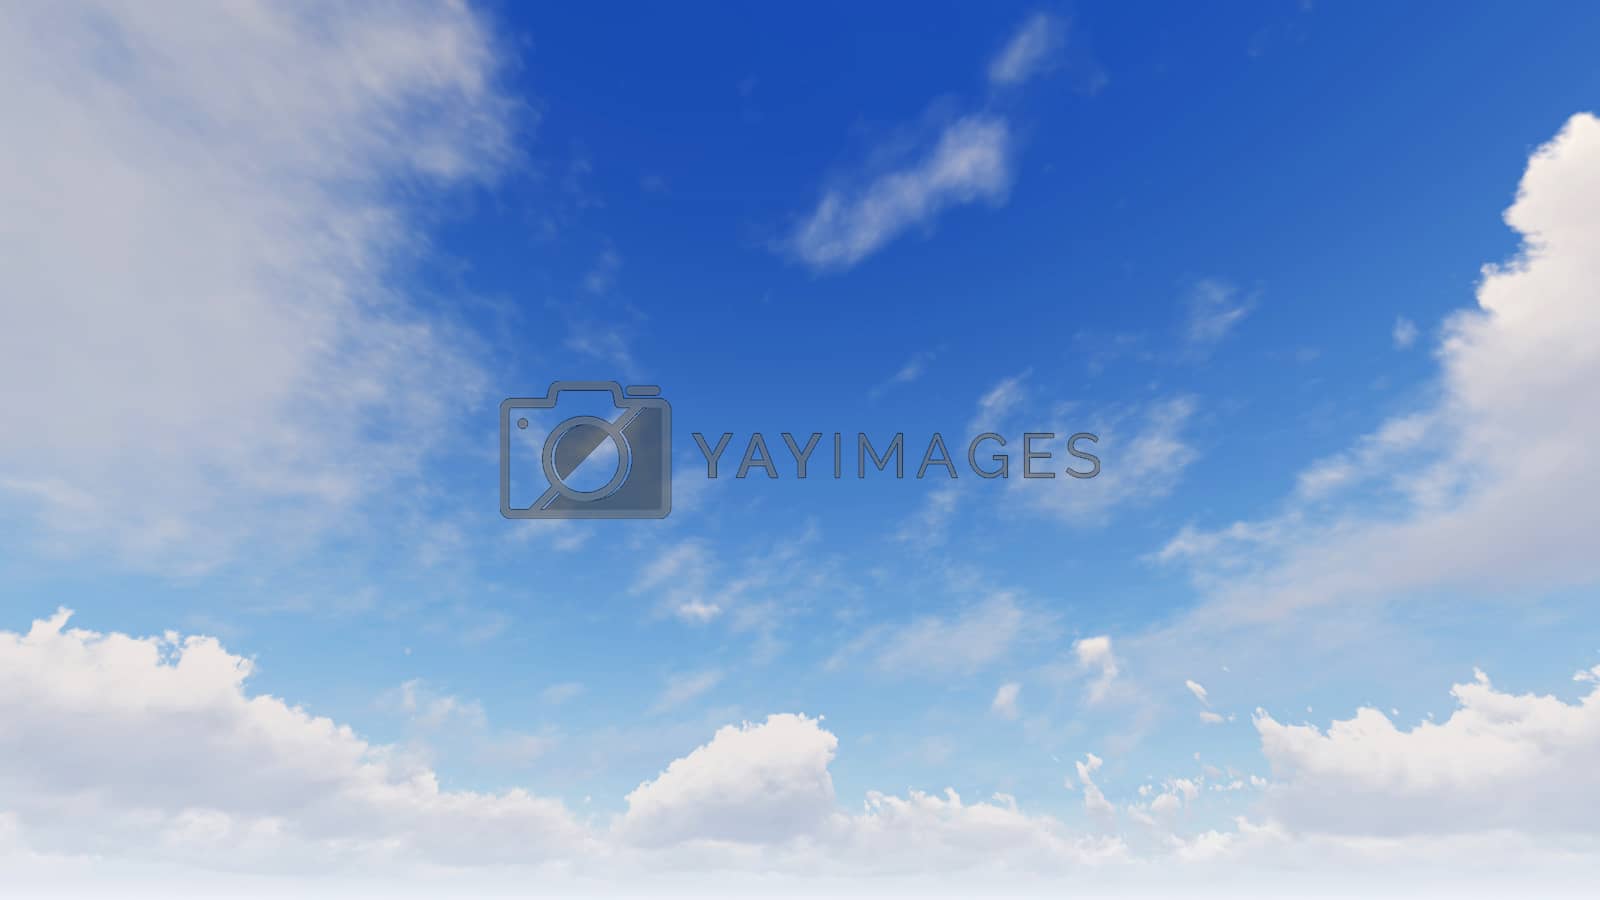 Royalty free image of Cloudy blue sky abstract background, 3d illustration by teerawit